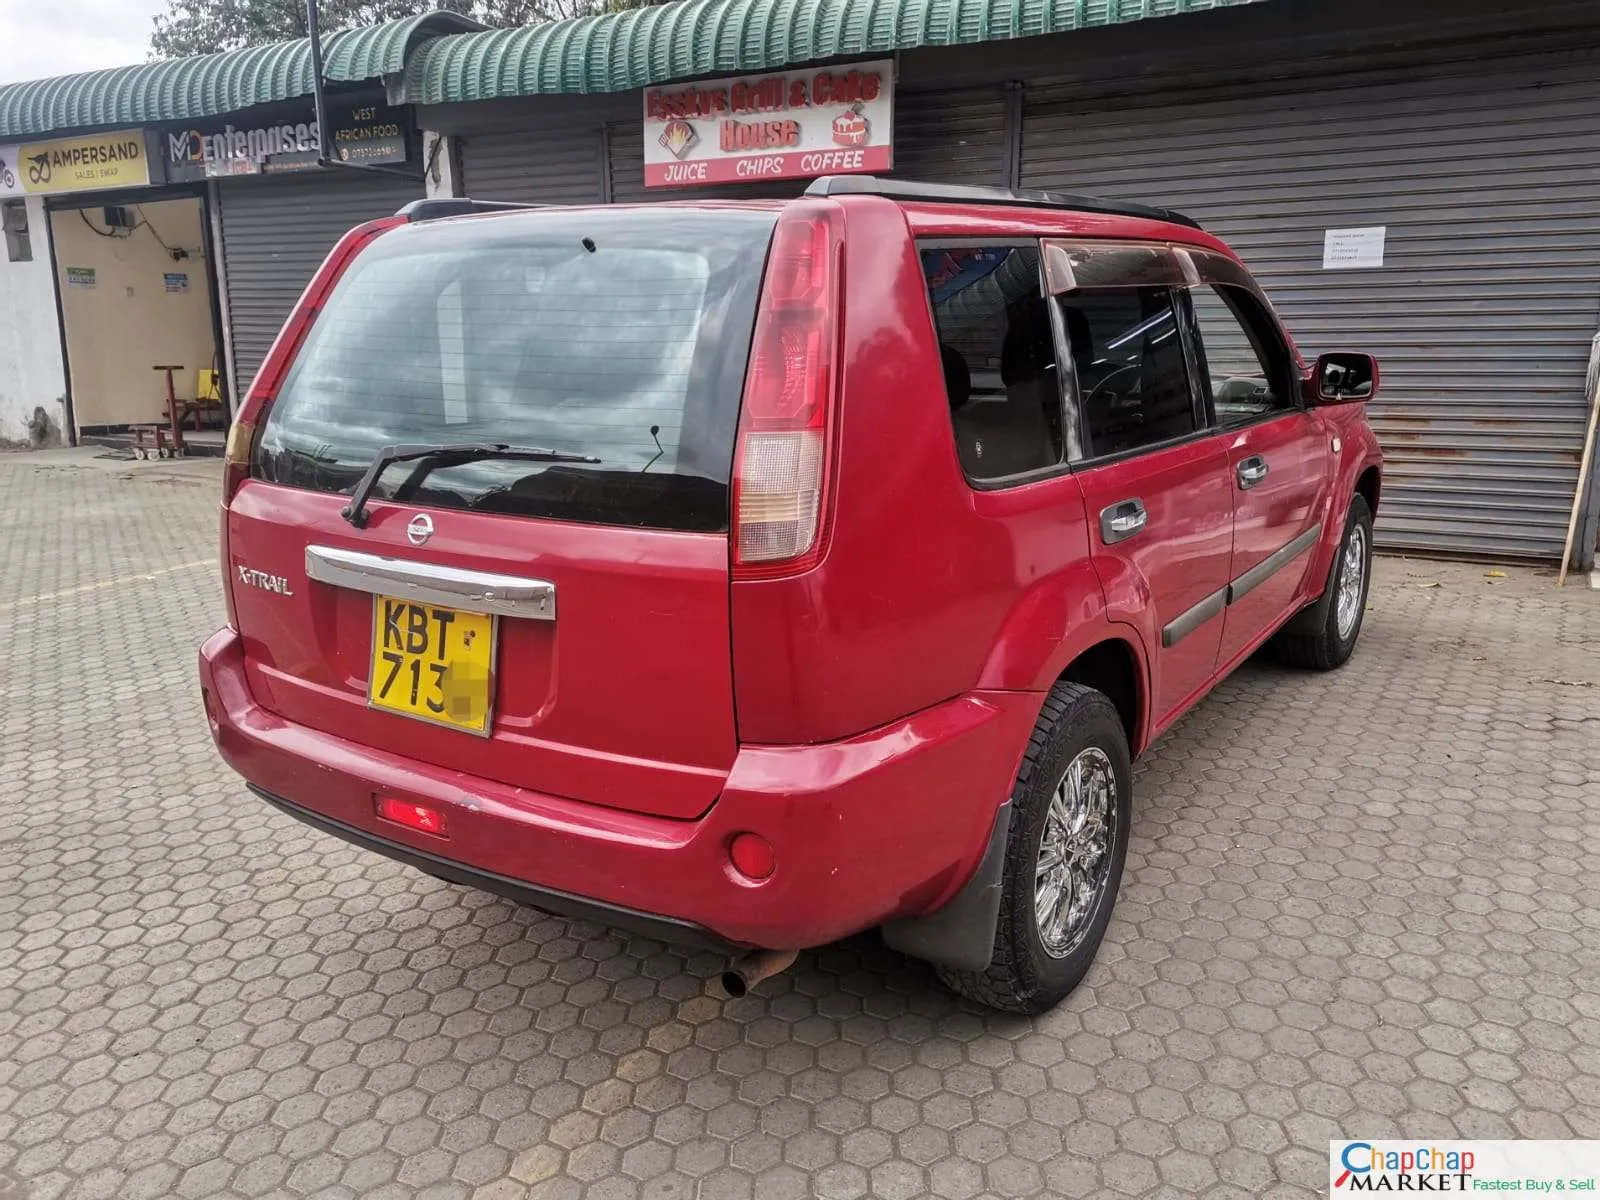 Nissan XTRAIL for sale in Kenya QUICK SALE You Pay 30% Deposit Trade in Ok HIRE PURCHASE INSTALLMENTS BANK FINANCE OK (SOLD)